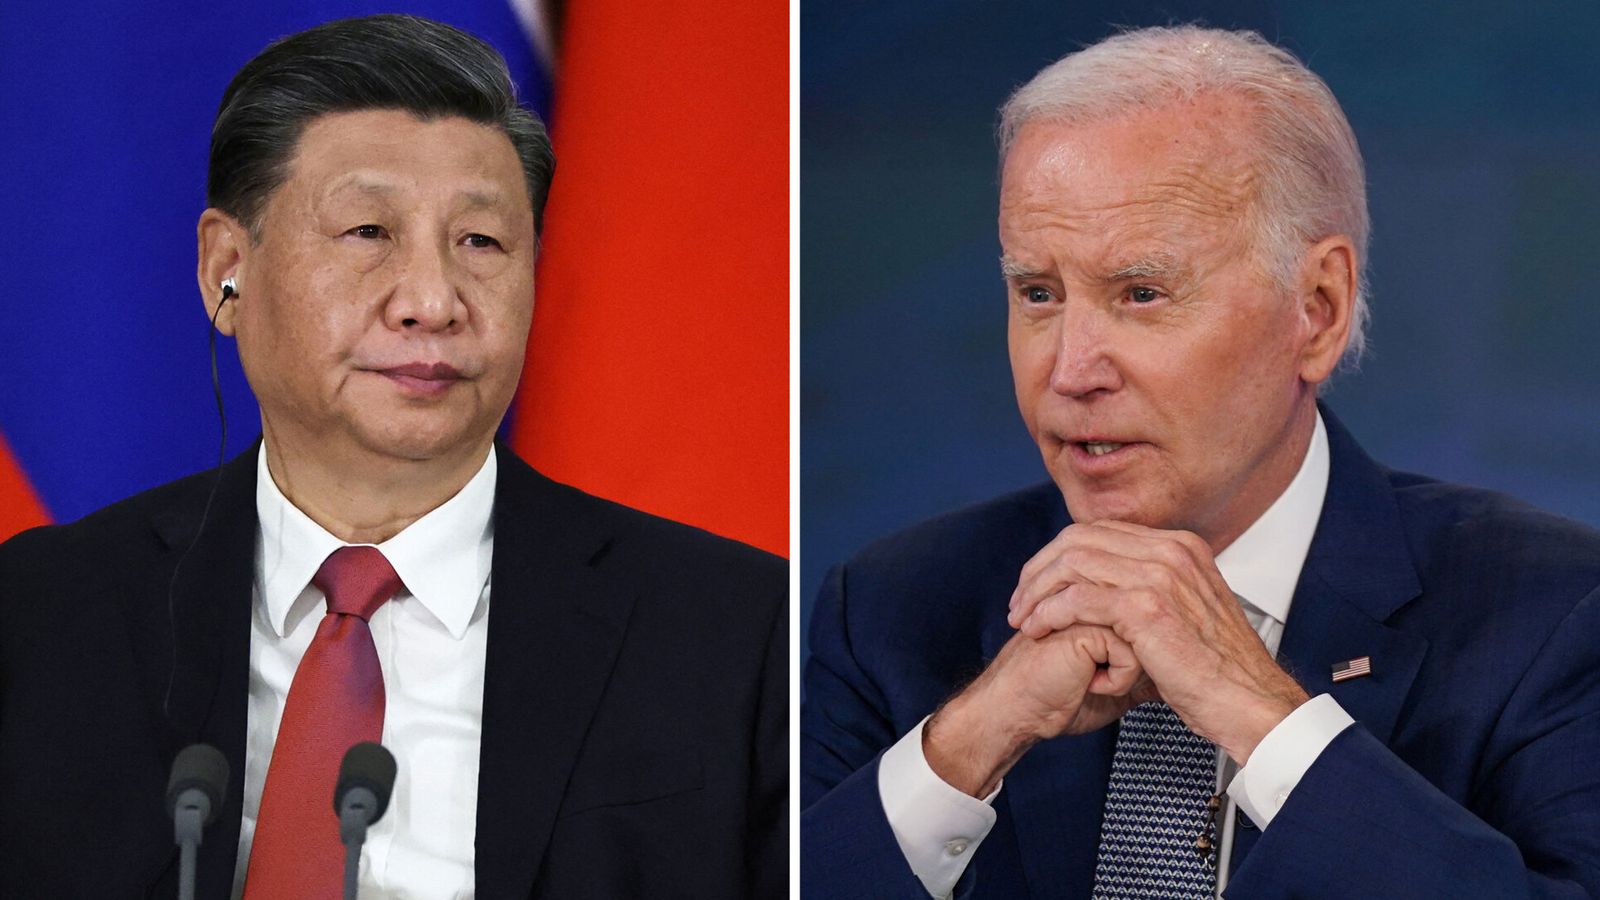 With US-China relations on a tightrope, Biden and Xi's rendezvous is more important than ever